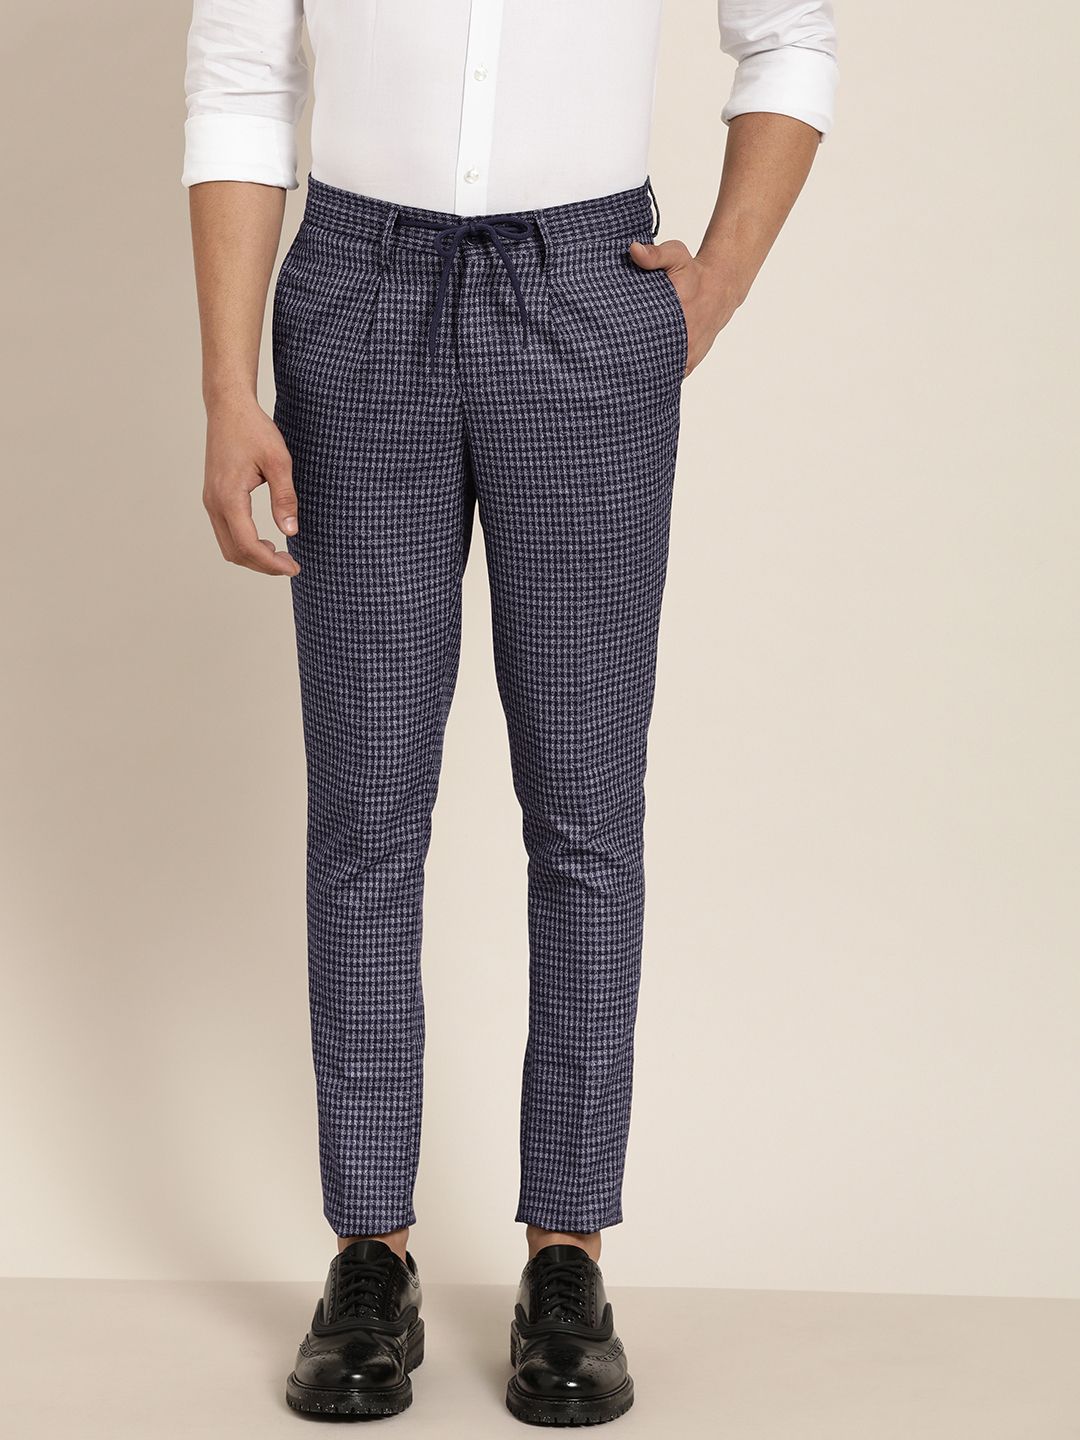 Buy INVICTUS Men Charcoal Grey Slim Fit Checked Formal Trousers  Trousers  for Men 7149892  Myntra